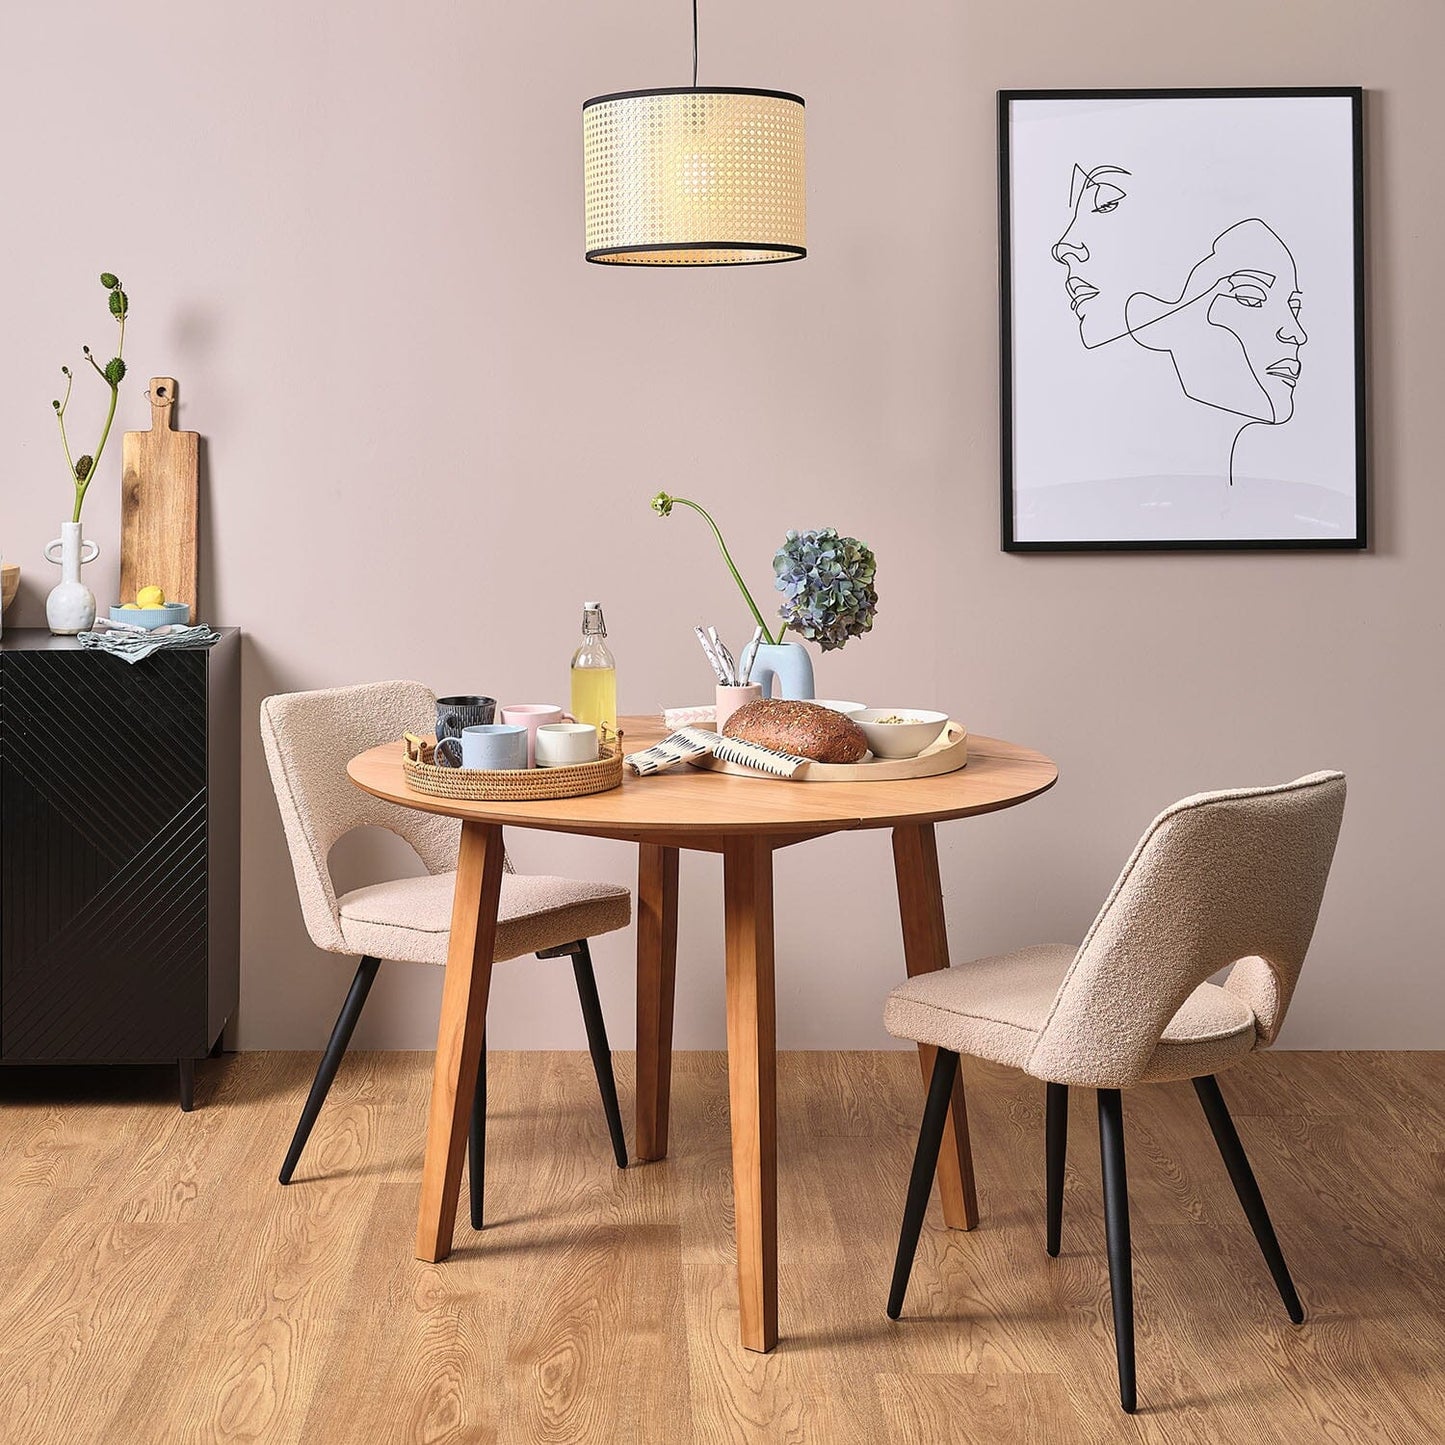 Charlie Pine Round Dining Table